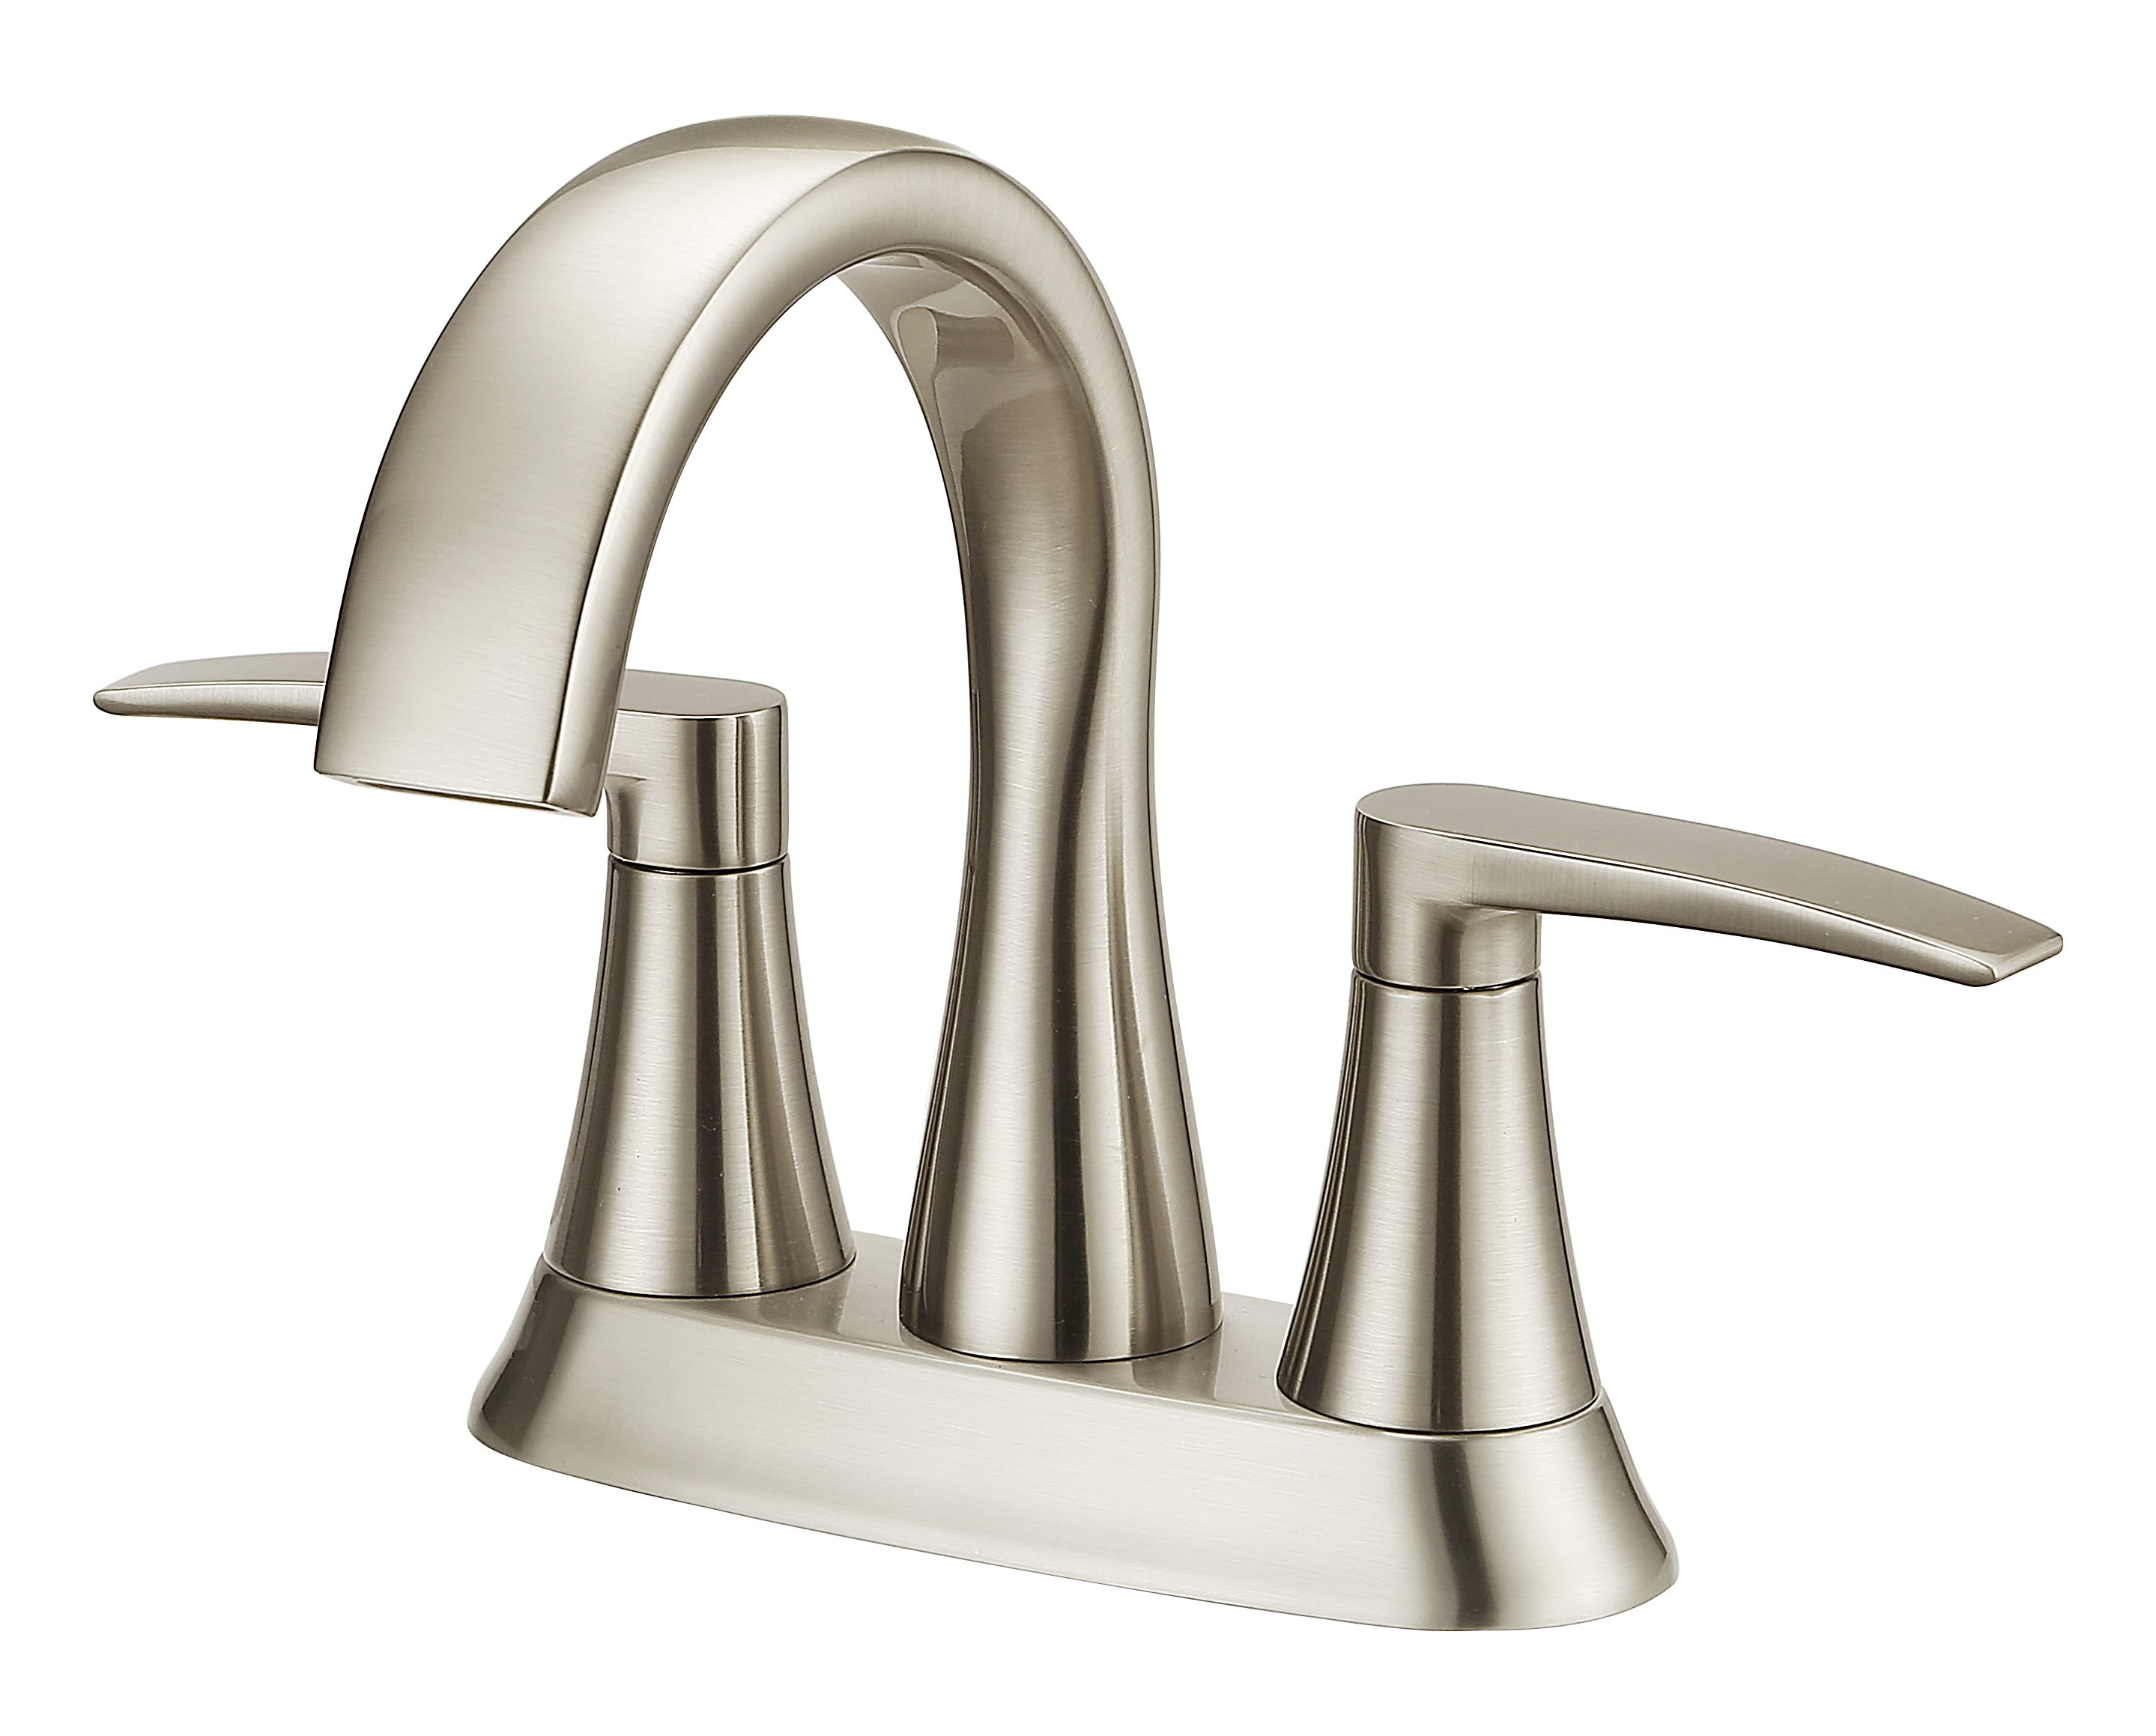 4 centerset bathroom sink faucet with drain